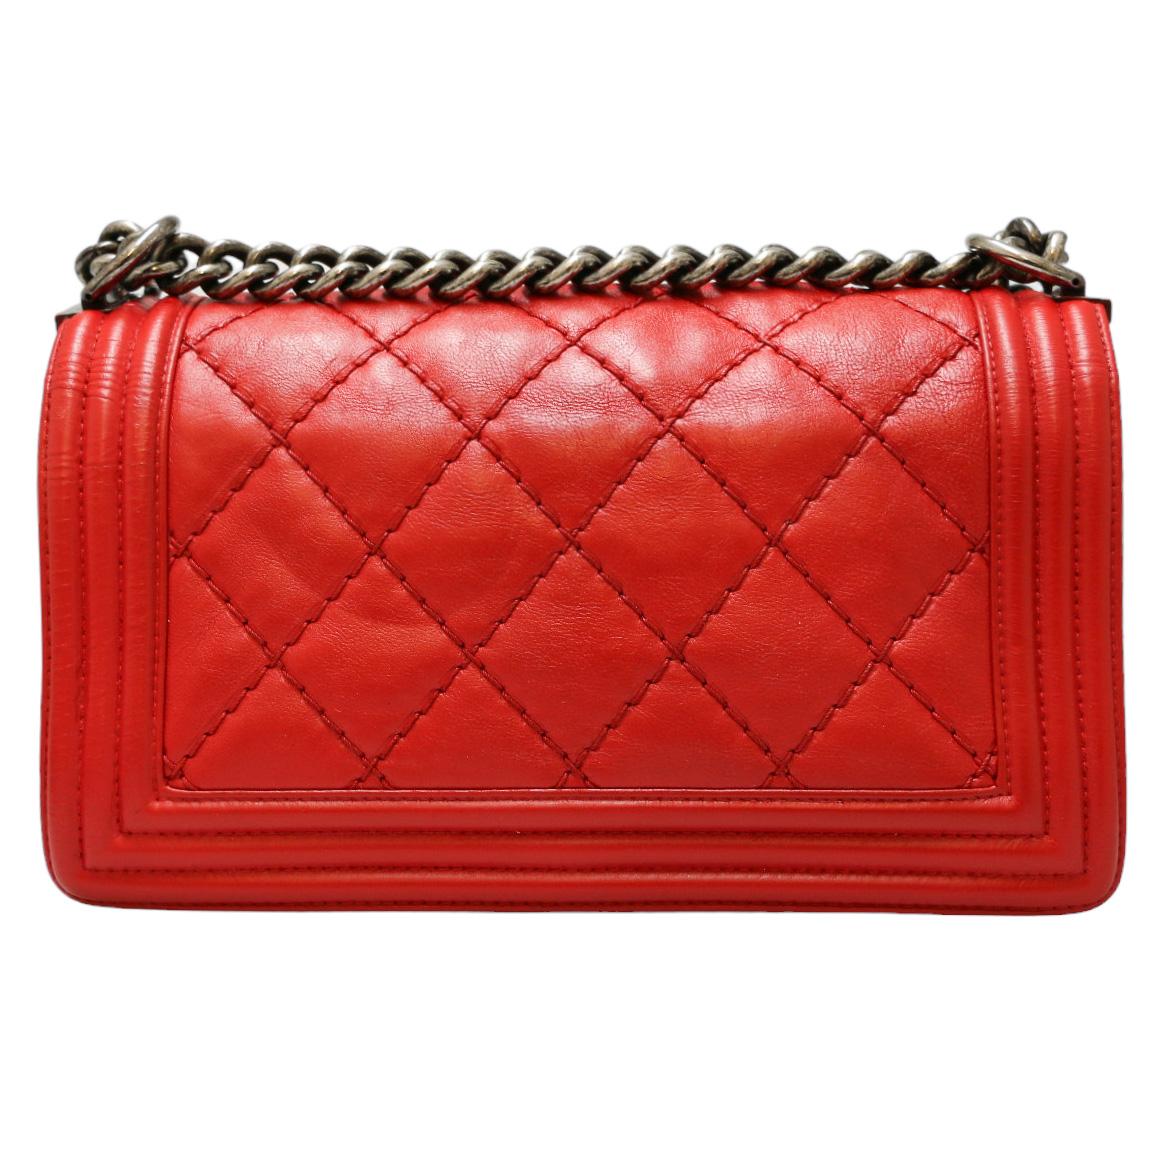 Women's CHANEL Red Boy Bag For Sale